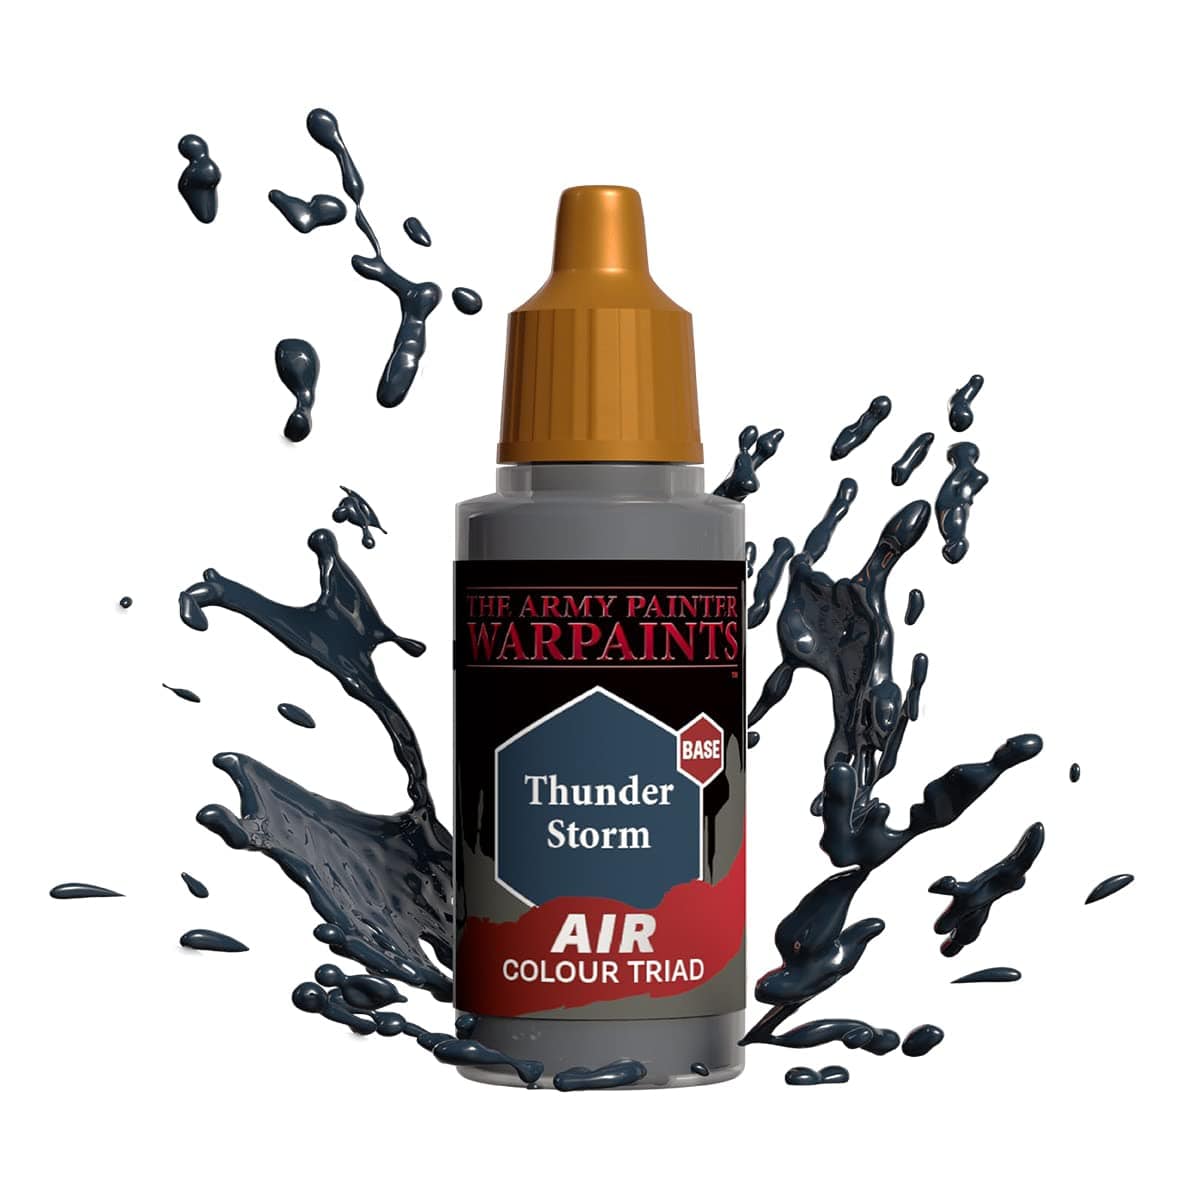 The Army Painter Accessories The Army Painter Warpaints Air: Thunder Storm 18ml